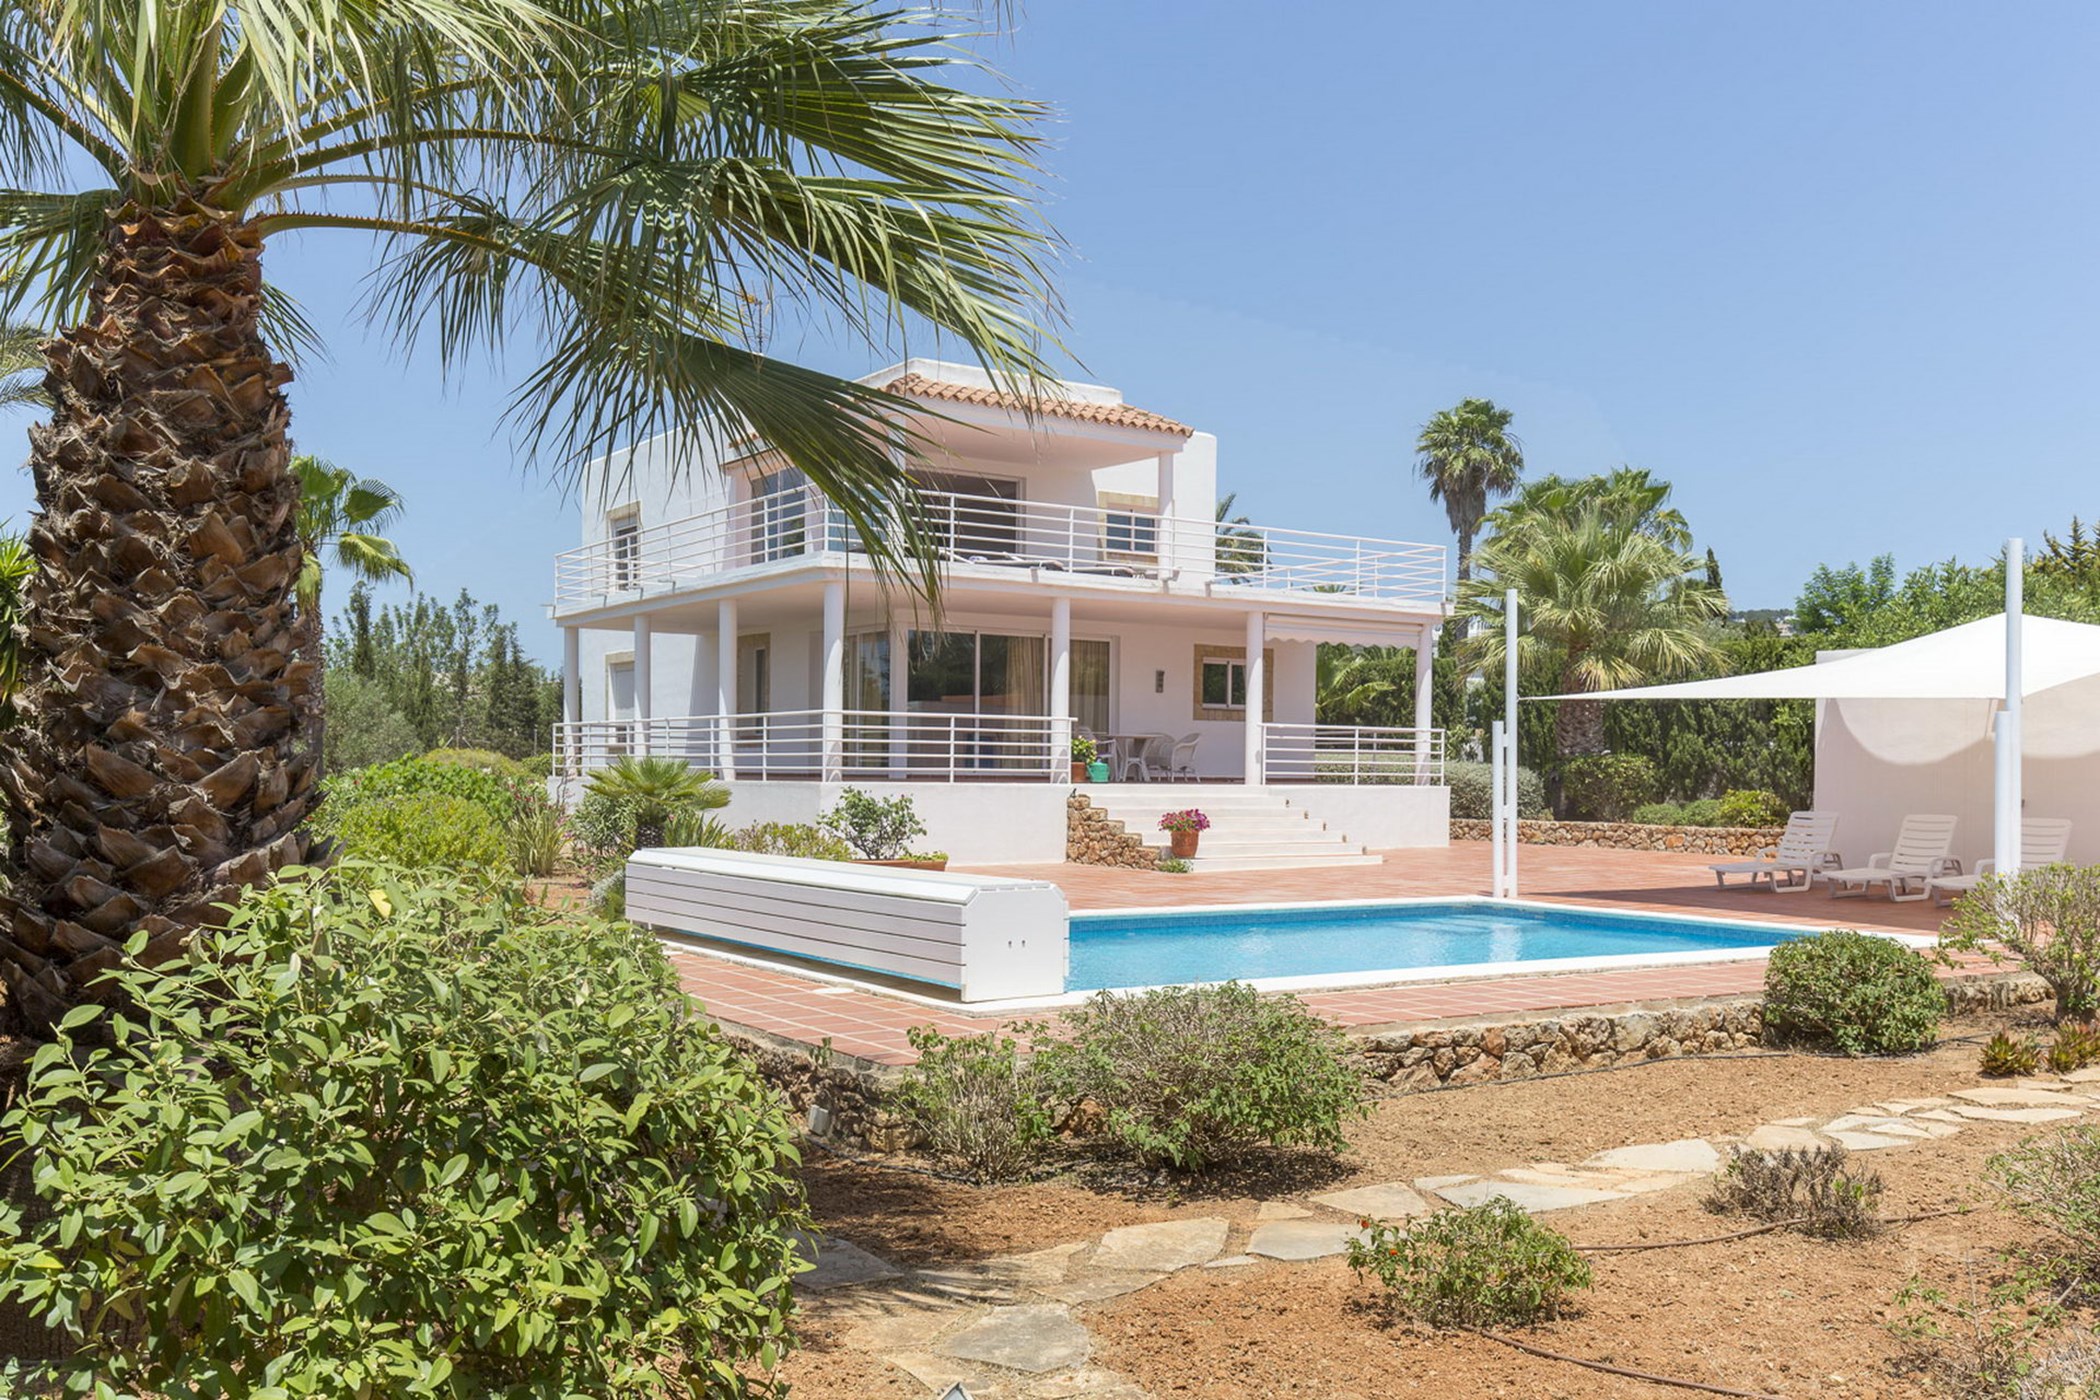 Villa with a big sunny terrace and panoramic views